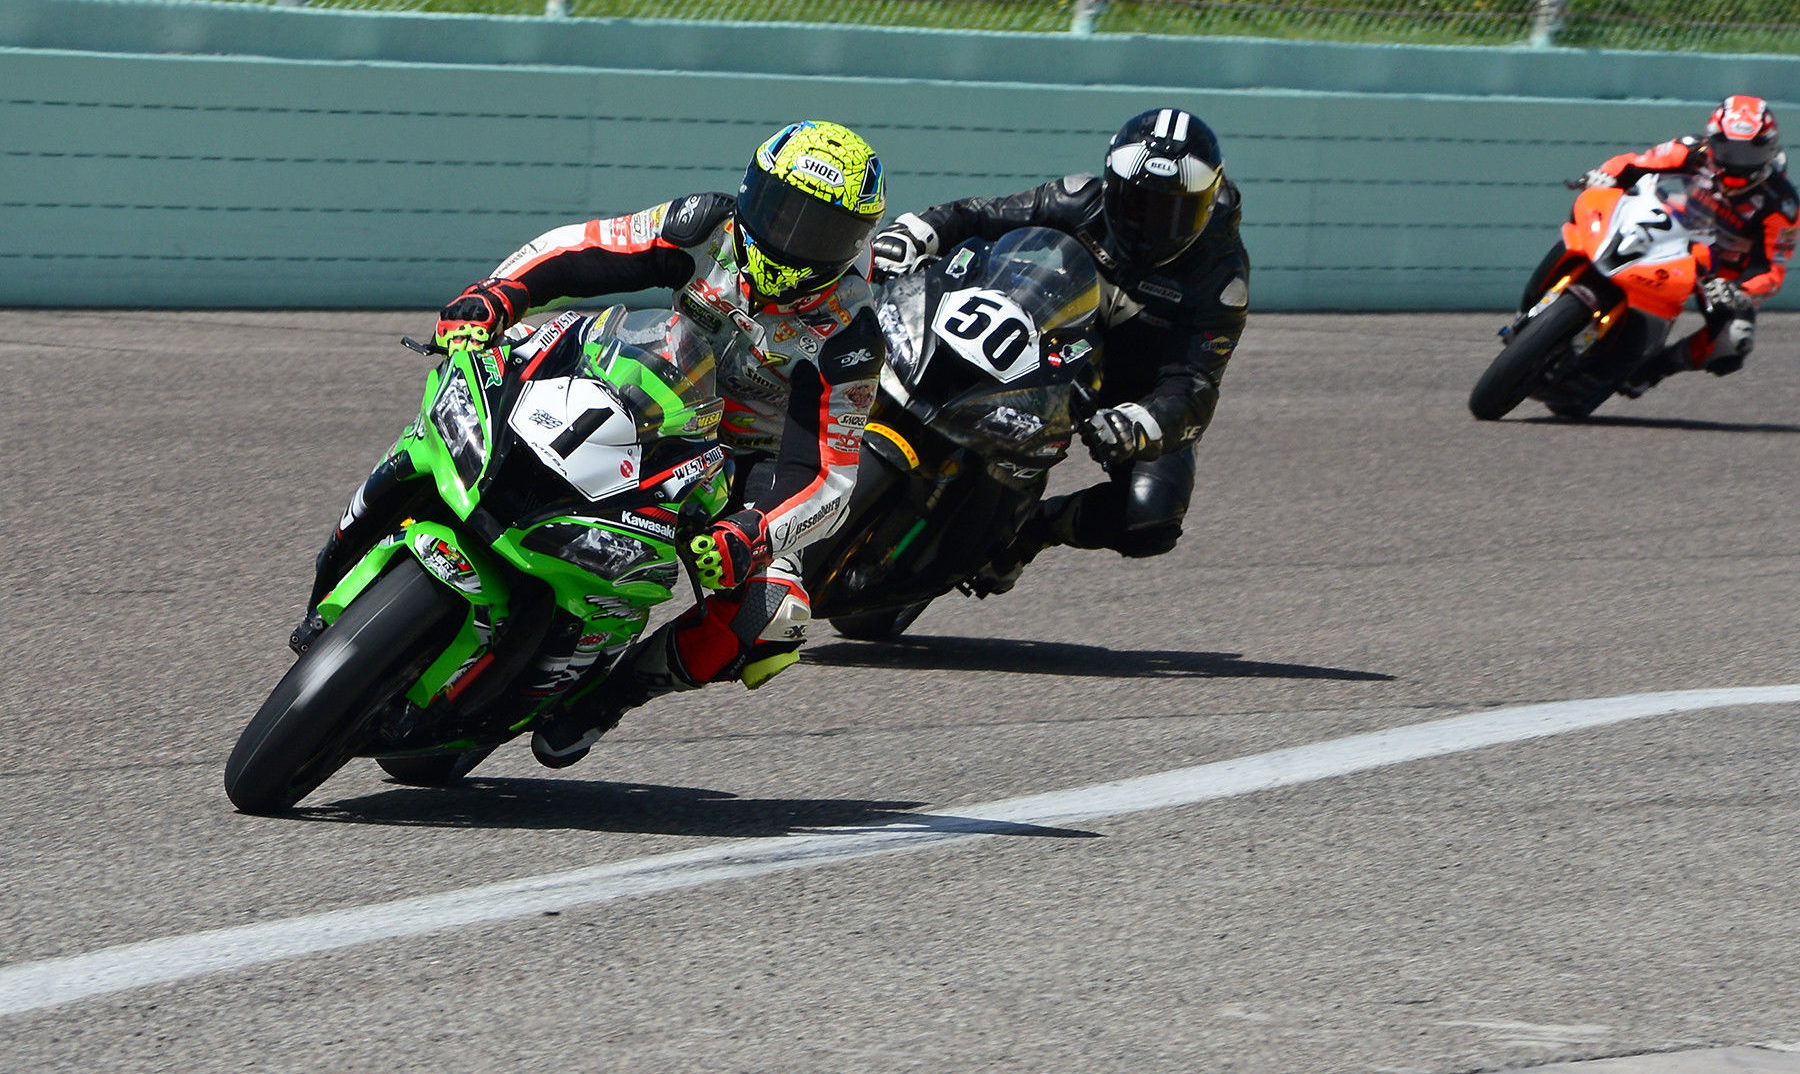 CCS racers in action at Homestead-Miami Speedway. Photo by Lisa Theobald, courtesy of CCS.